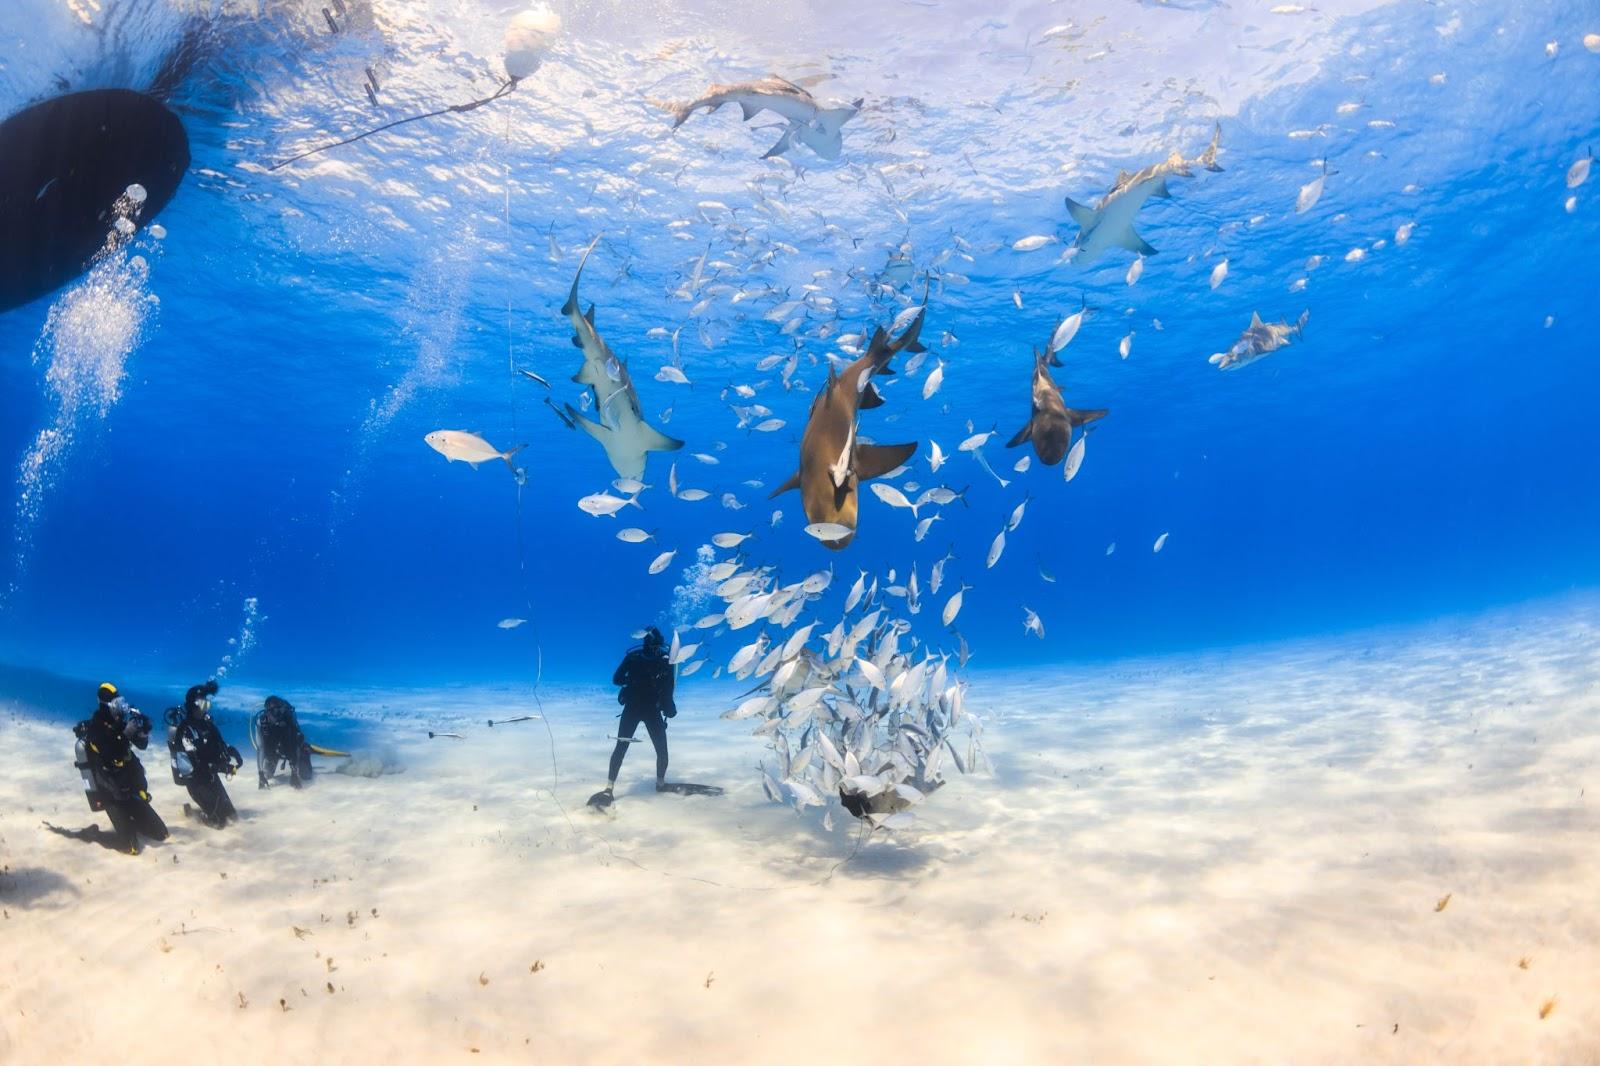 Diver surrounded by Lemon shark and caribbean reef shark on shallow clear water at Tiger beach, Bahamas